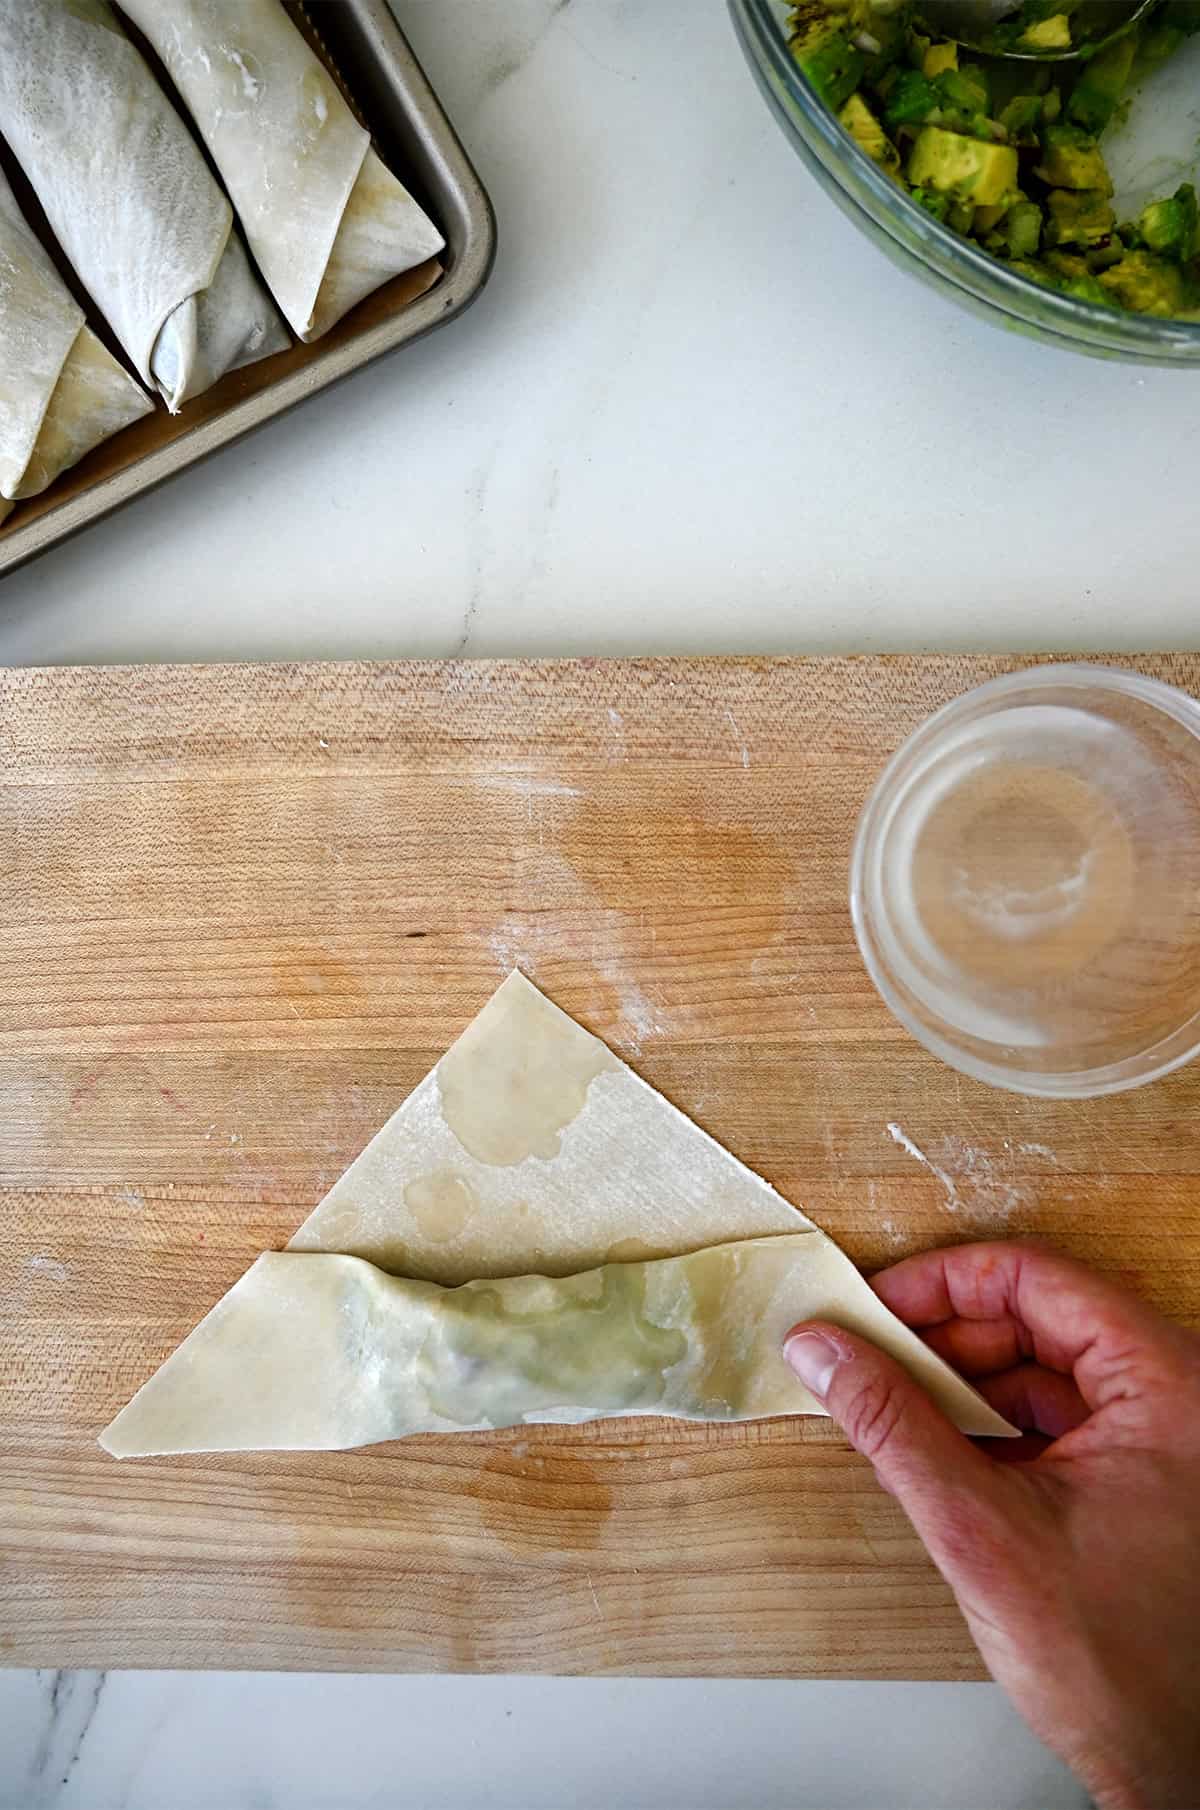 The second fold when making egg rolls just before folding in the corners.